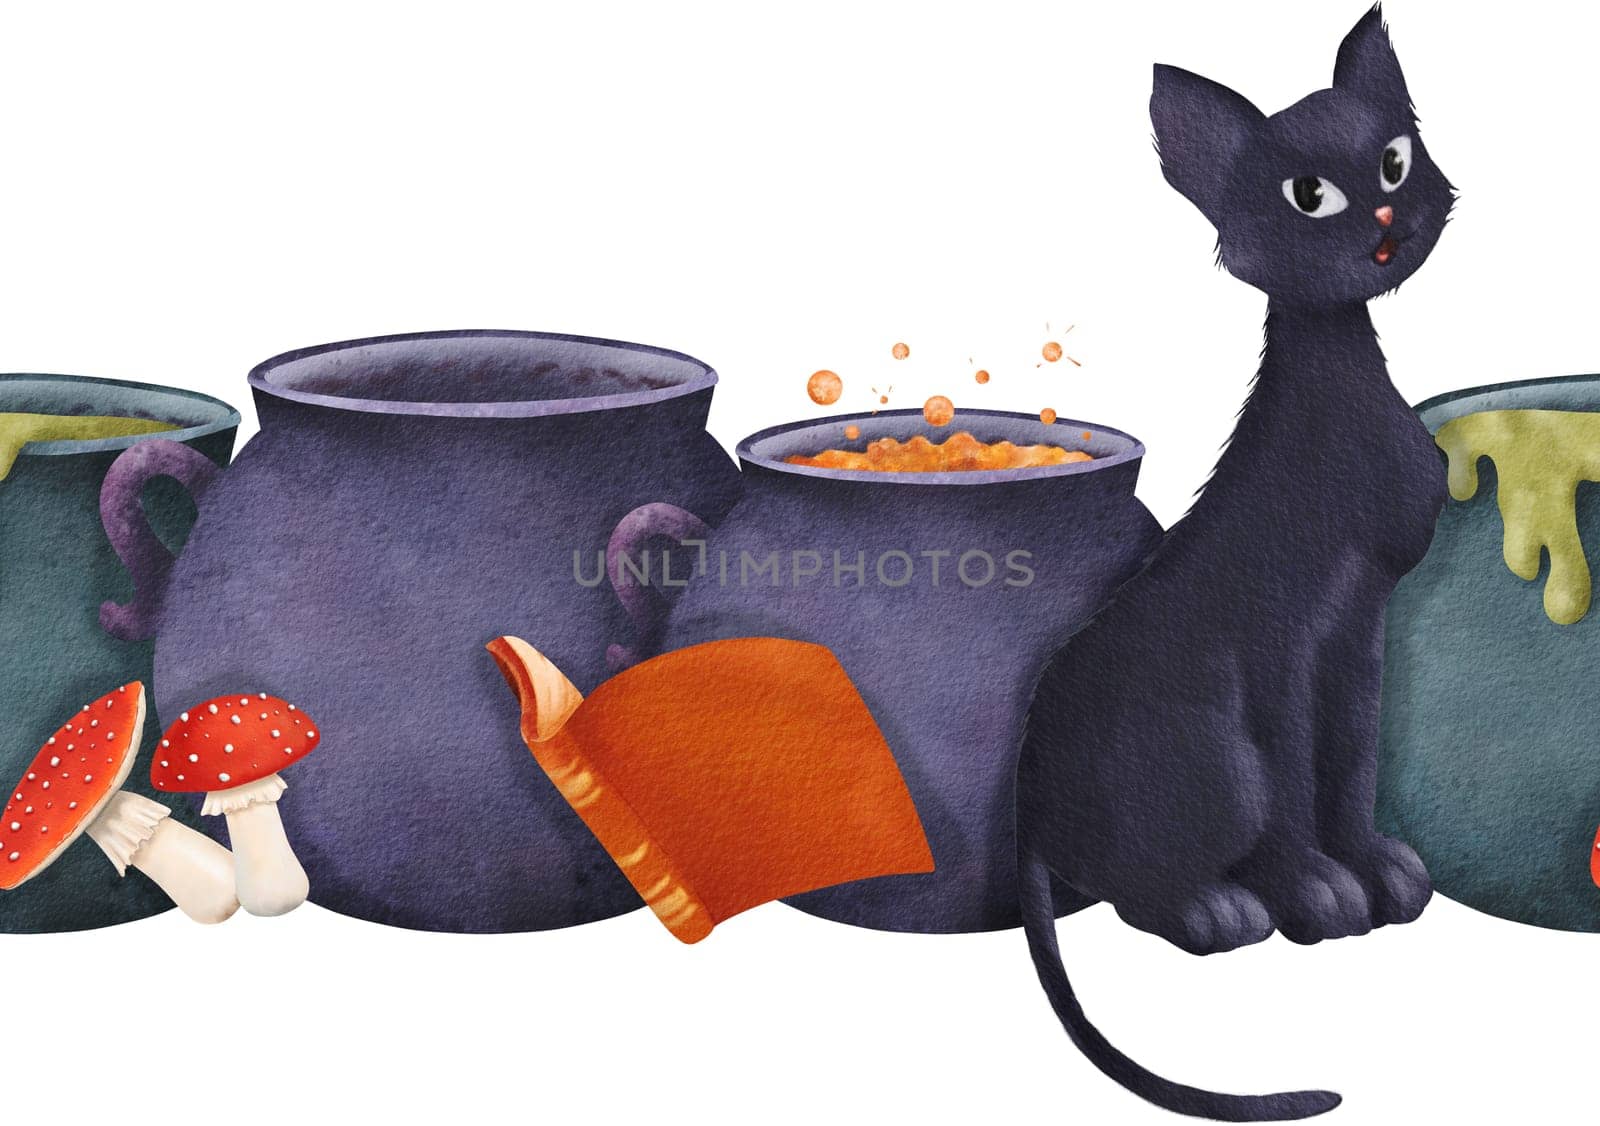 Seamless Halloween border. cauldrons with potions, magical spell books, poisonous fly agaric mushrooms a black witch's cat. Classic holiday elements in a watercolor illustration. for website and cards.